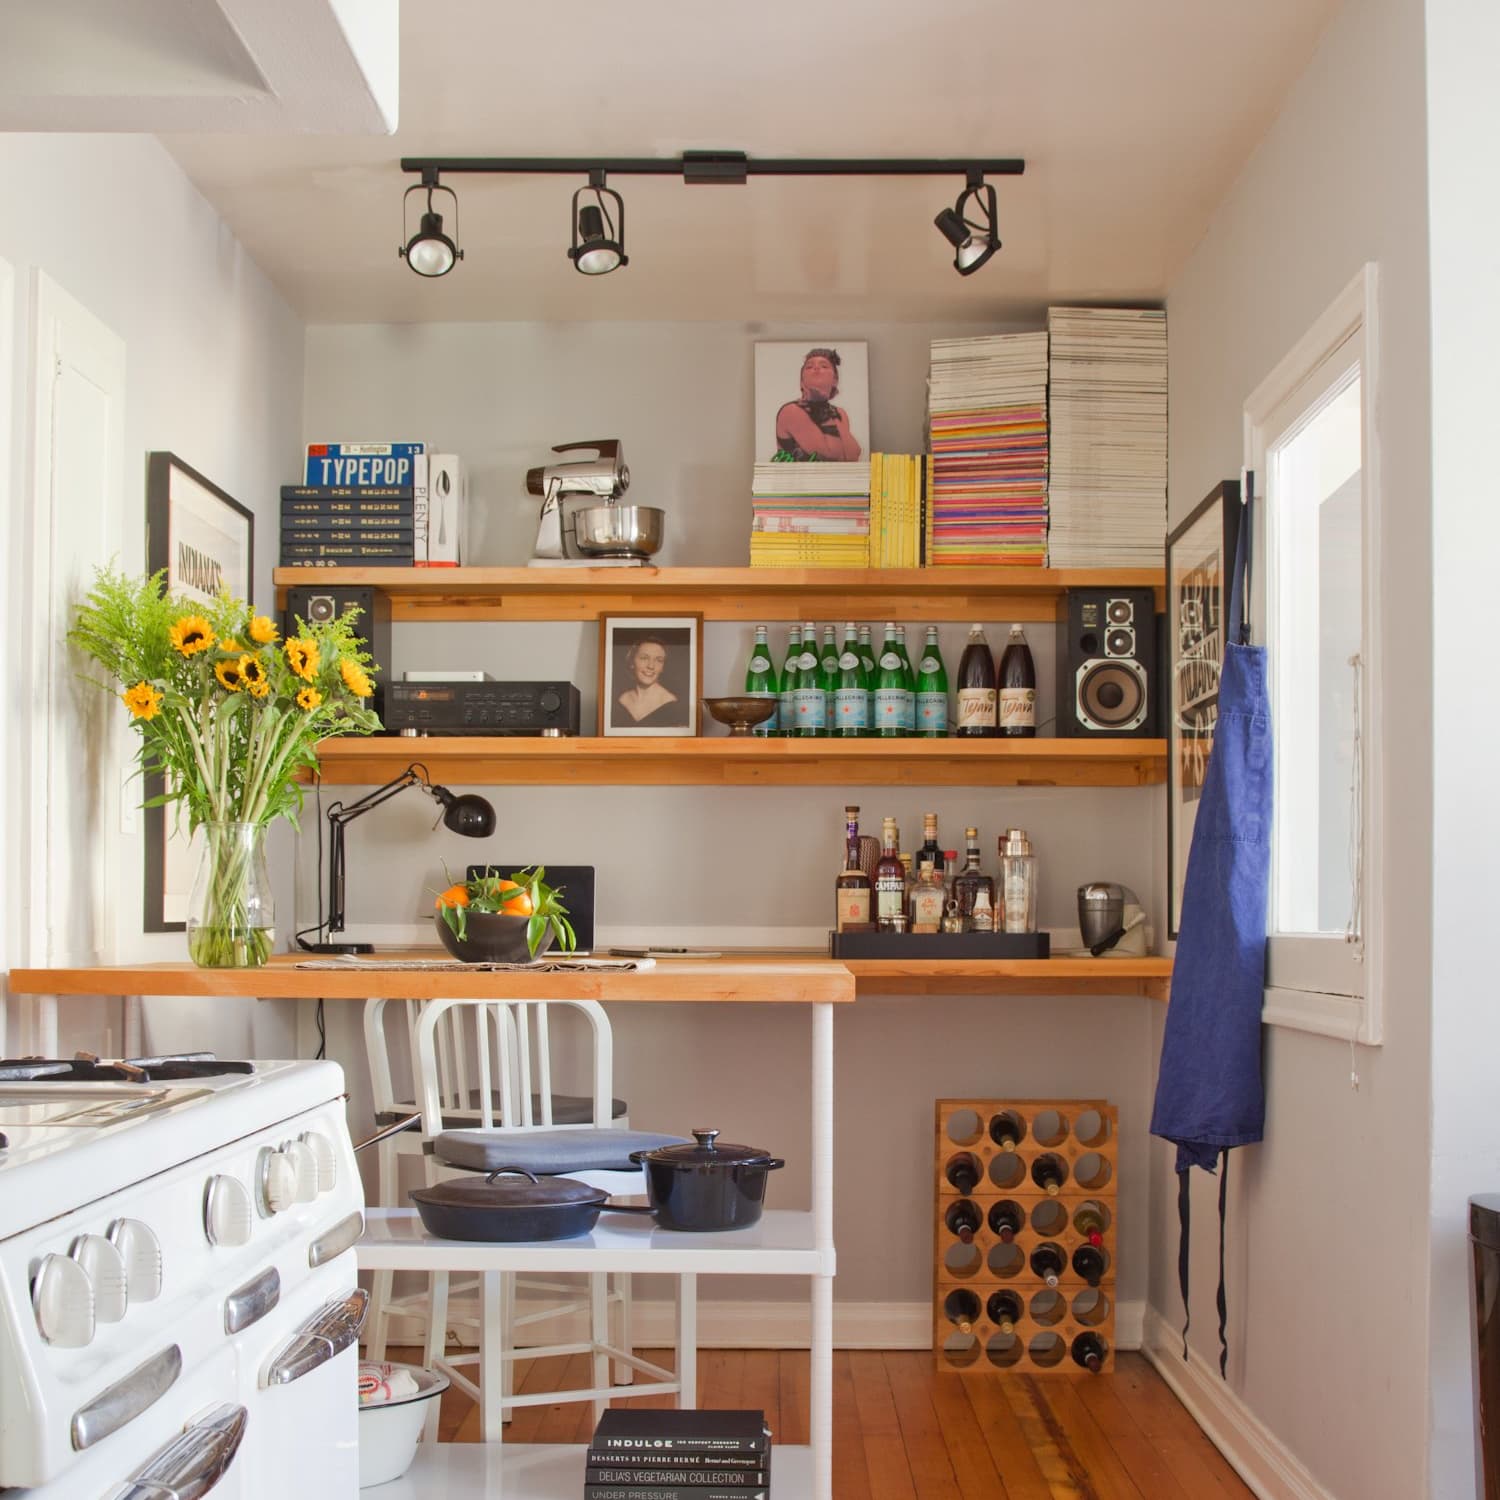 How to Make Small Kitchens Look Bigger